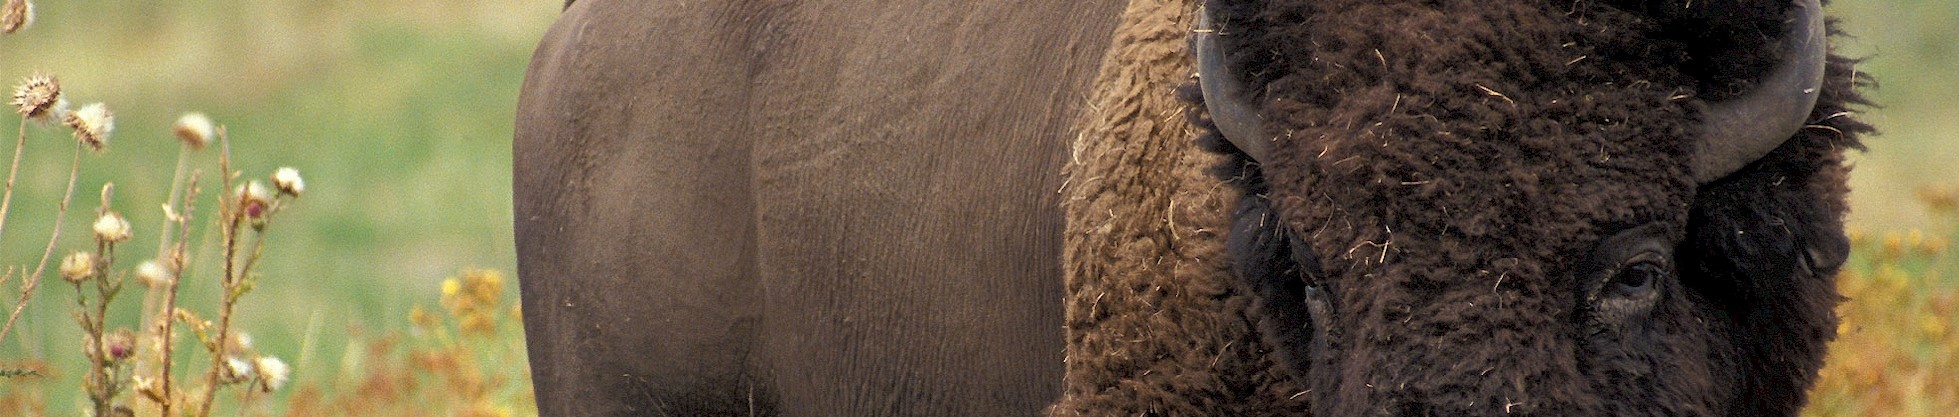 Bison, showing especially a close up of eyes, fur, and horns. 